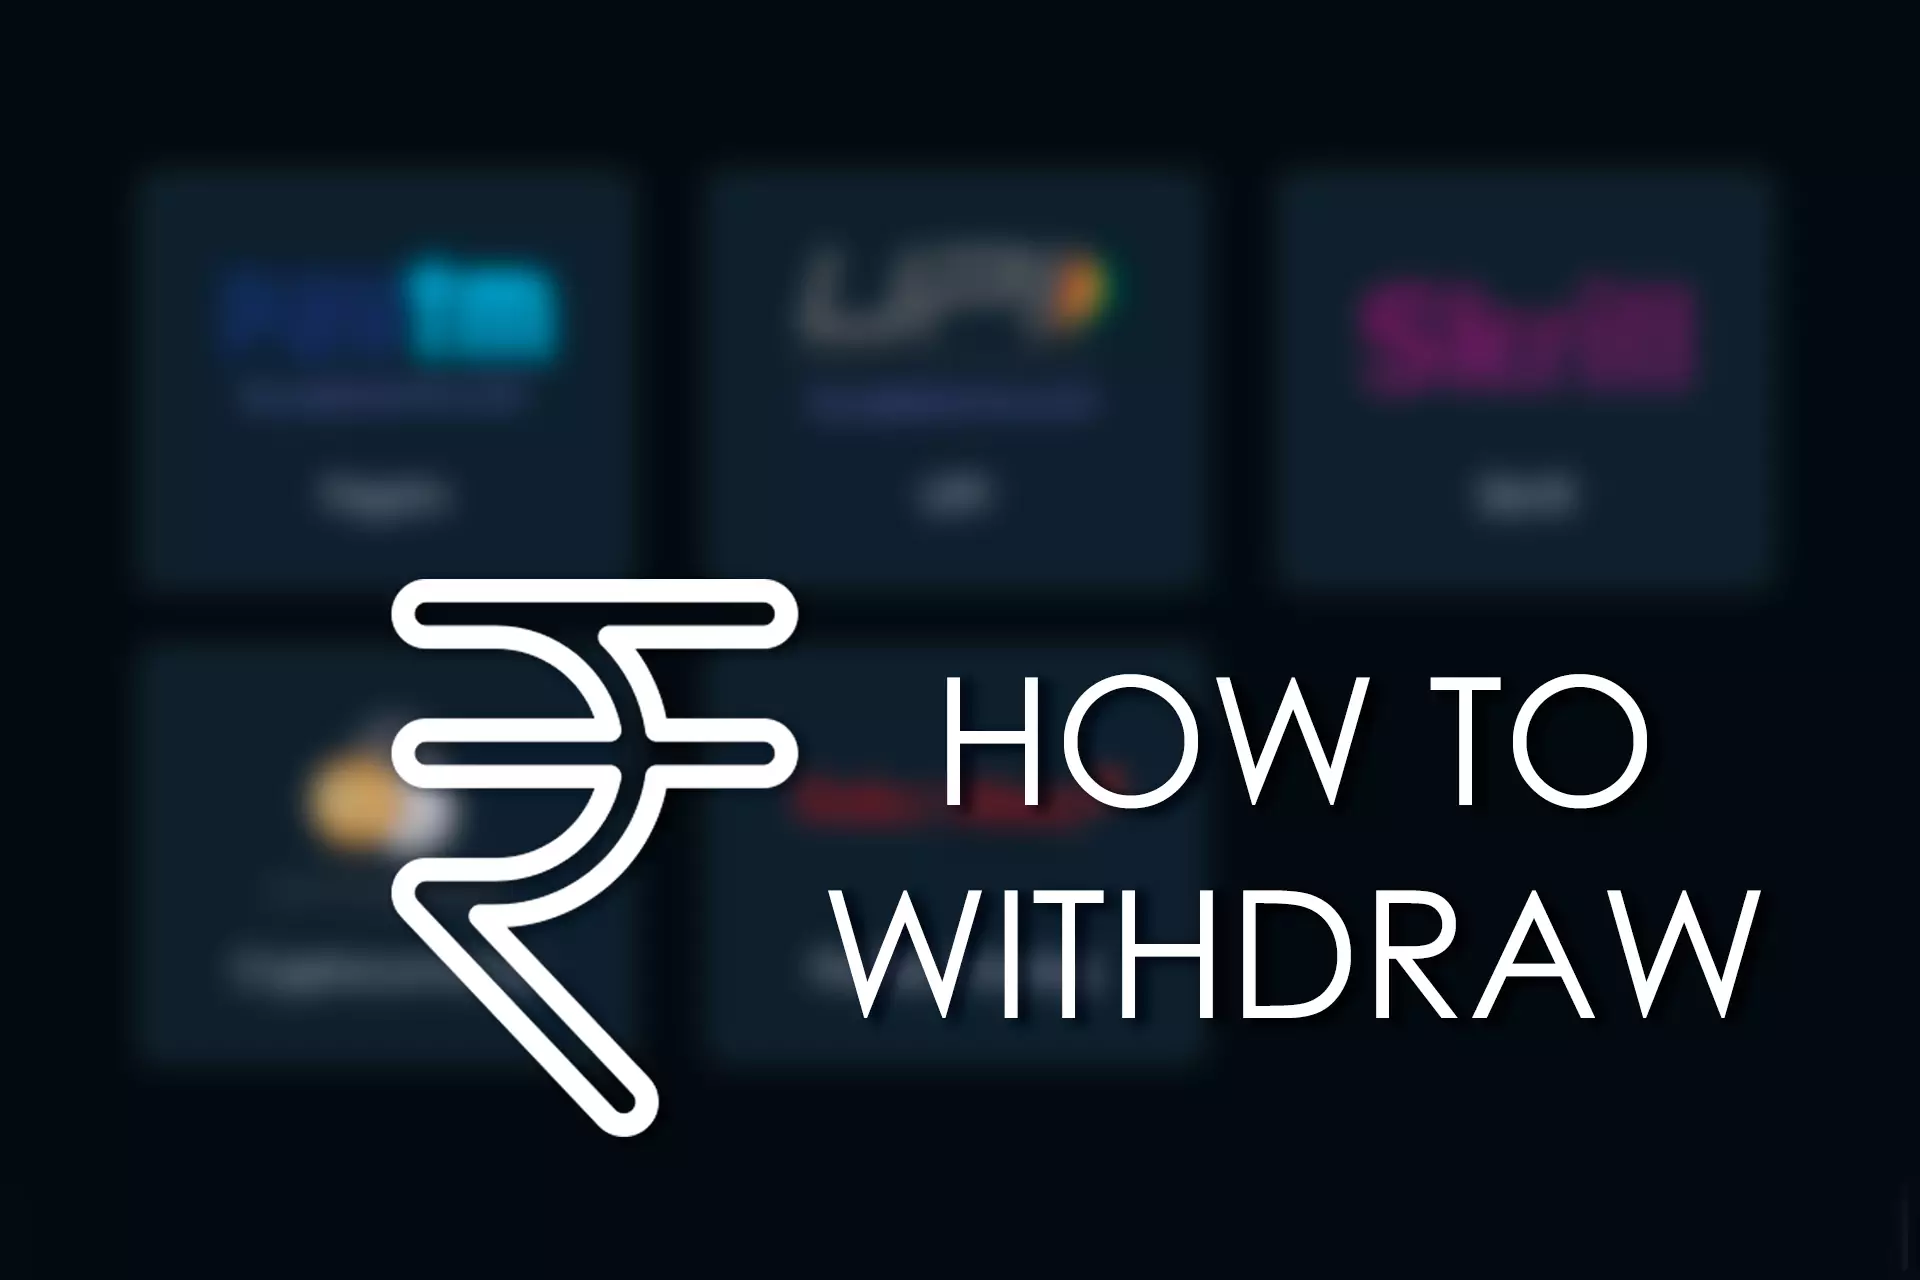 You can withdraw funds from cricket betting sites using a convenient method.